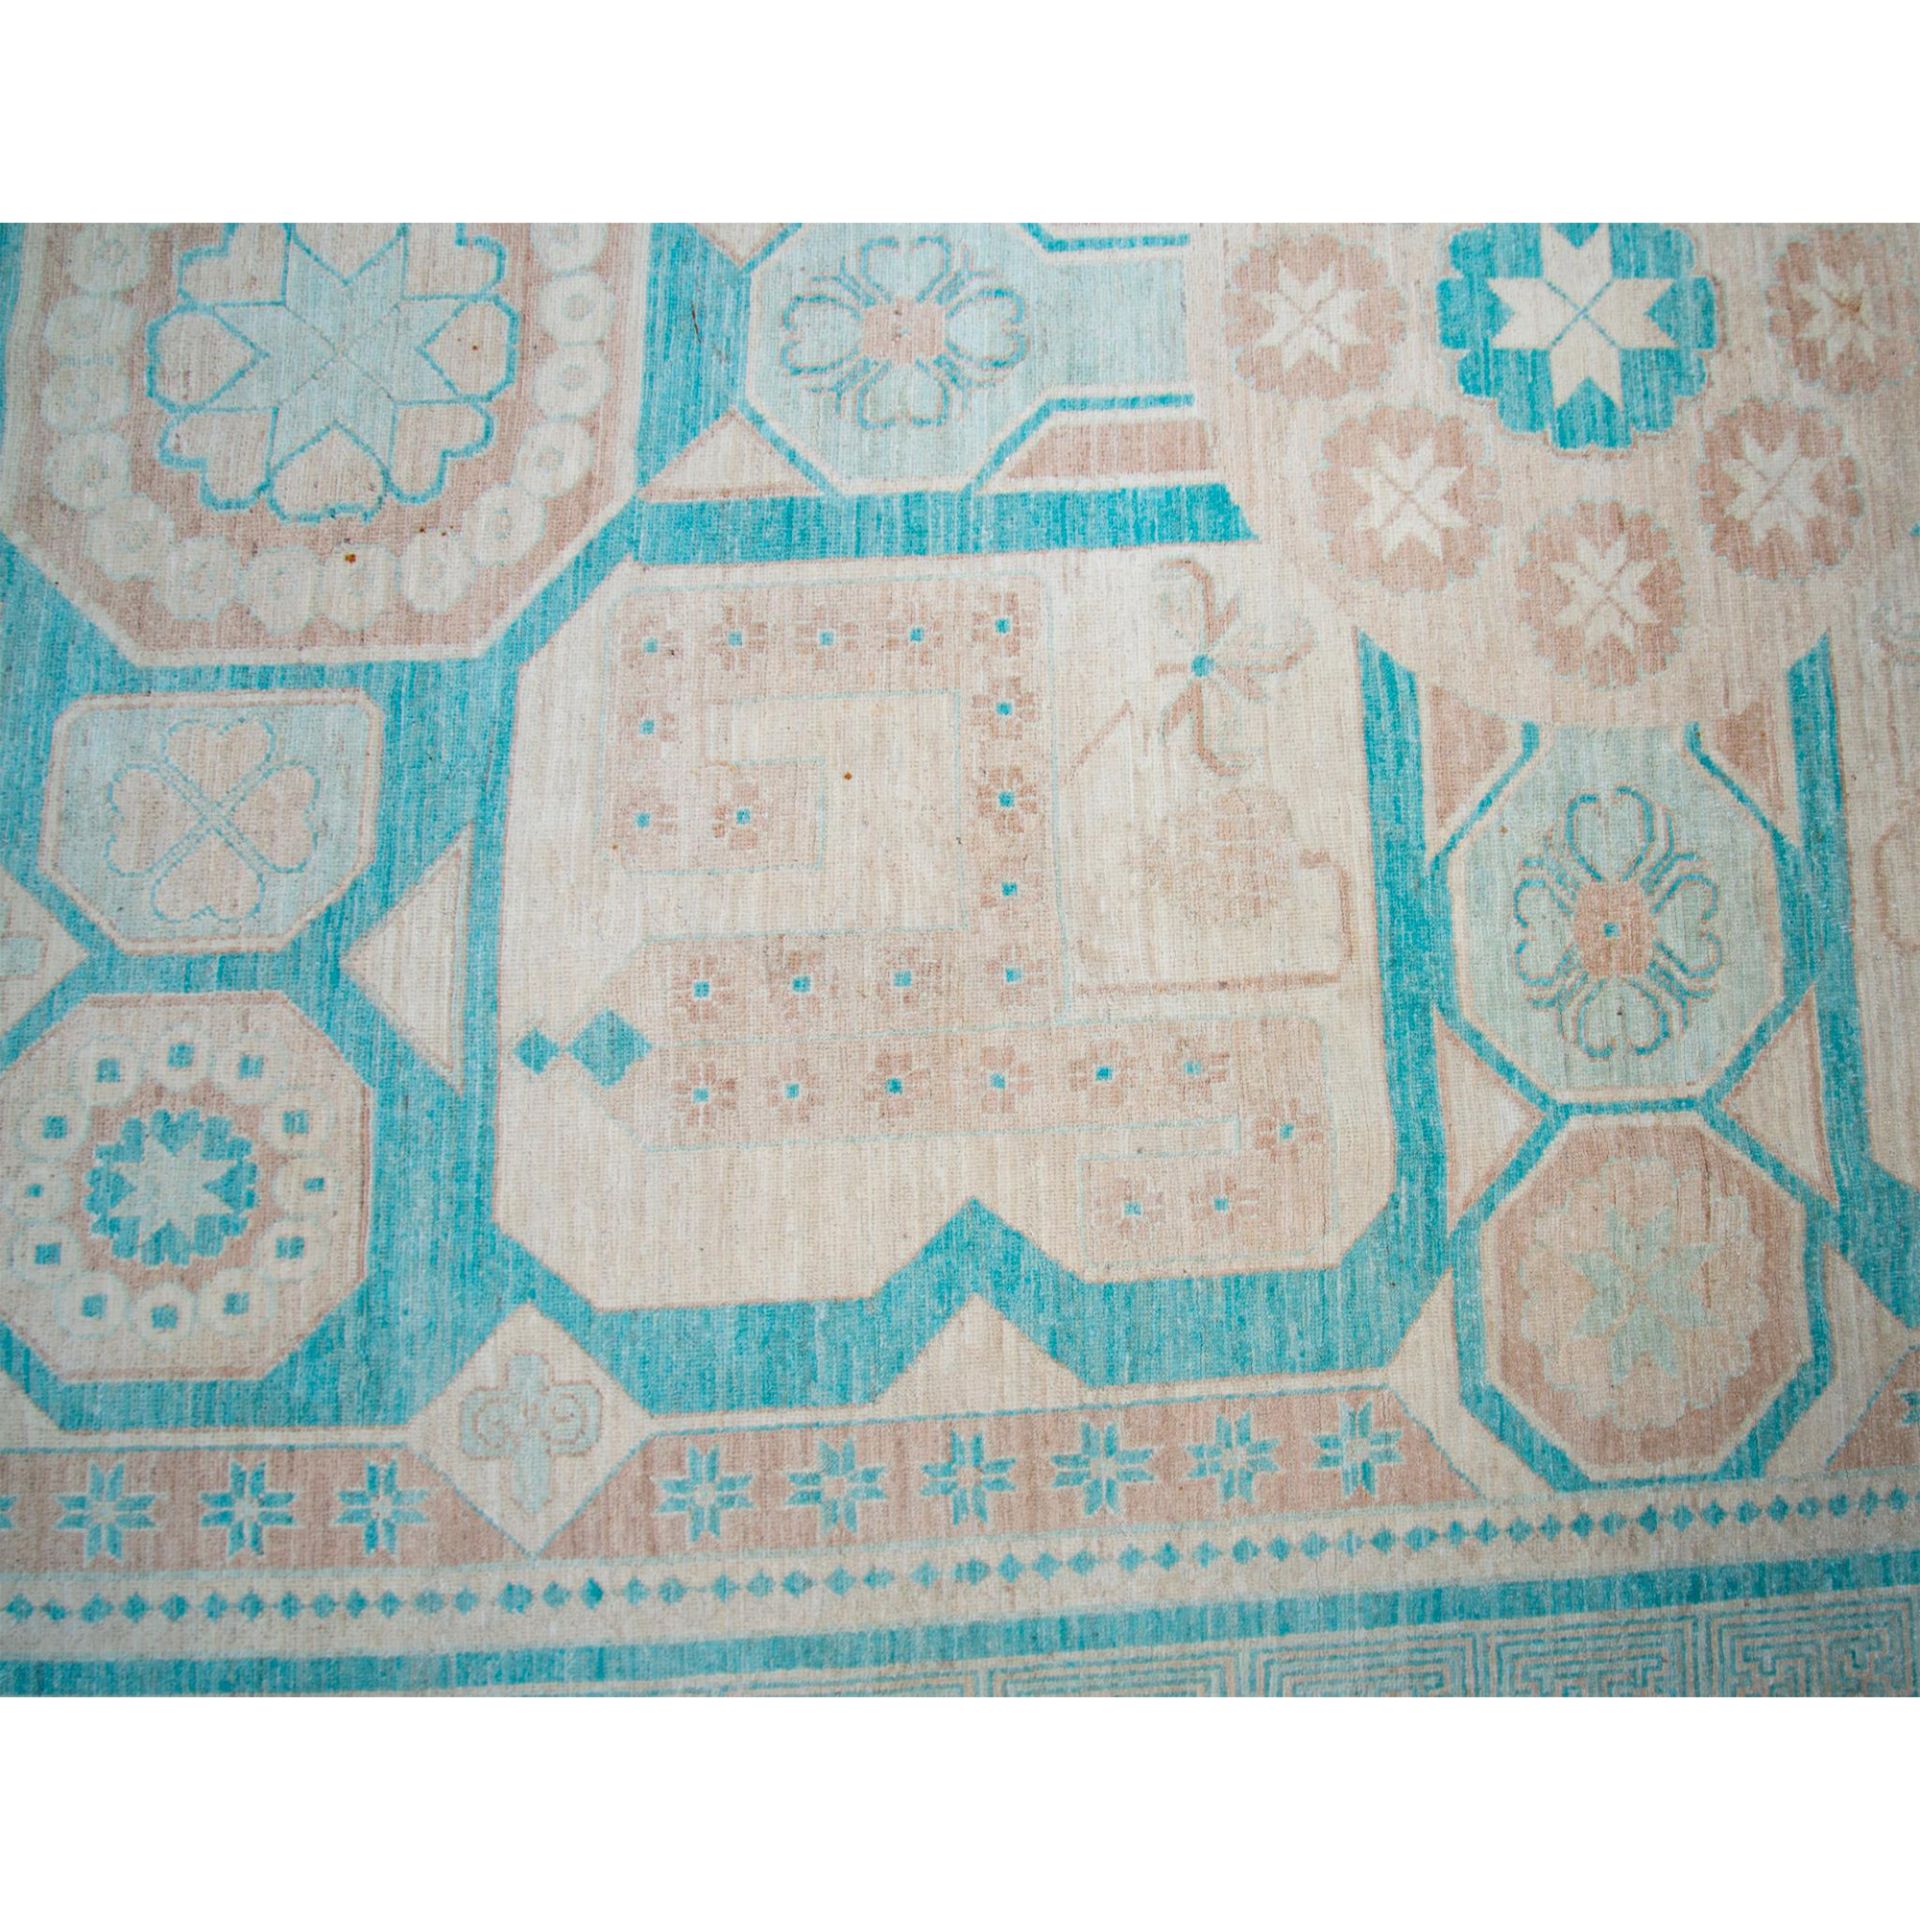 Middle Eastern 100-Percent Hand Woven Wool Rug - Image 7 of 7